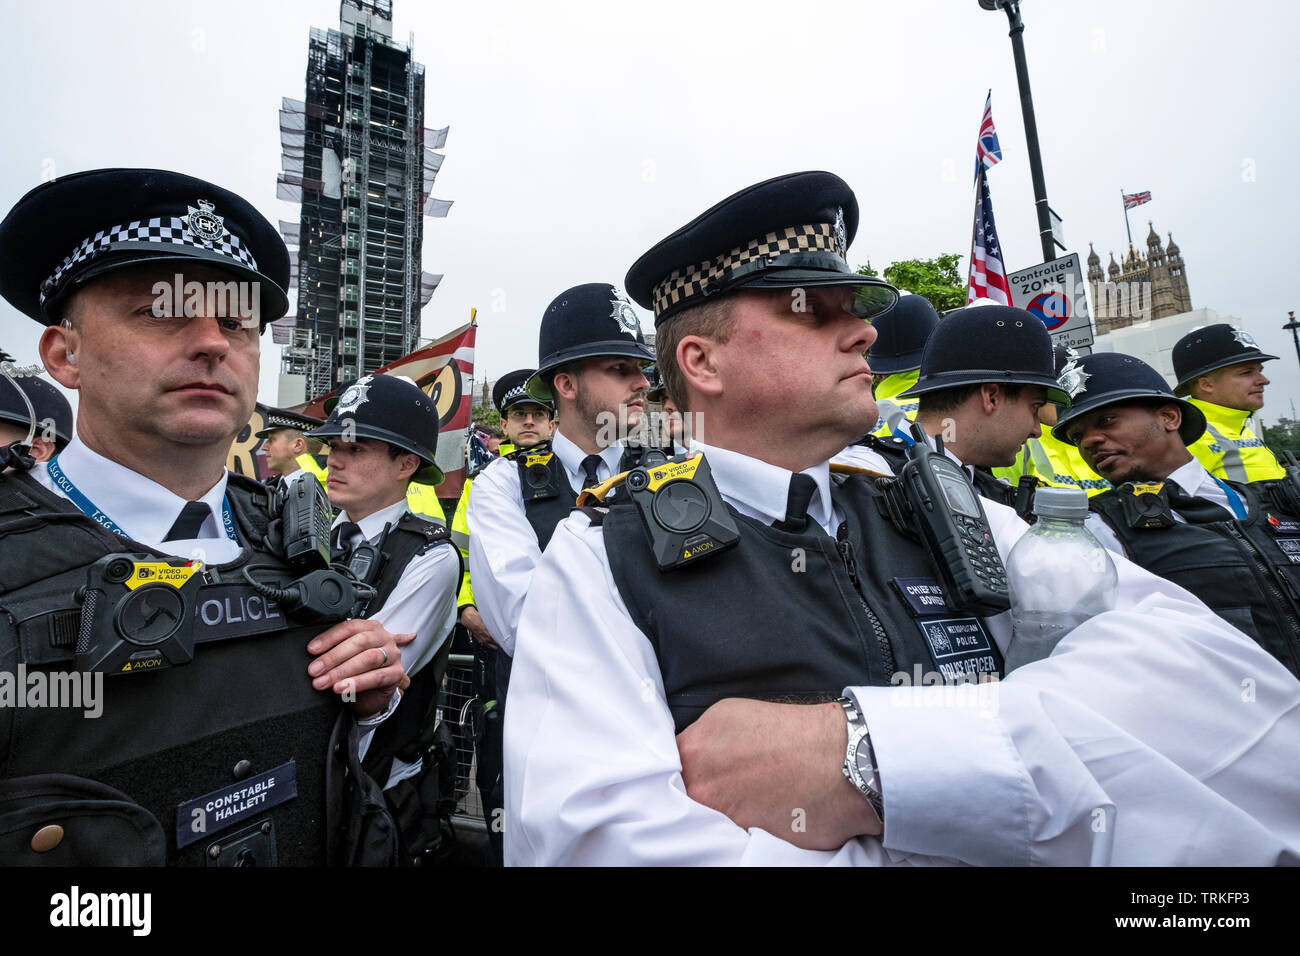 Police outside Parliament with body warn video cameras policing 'Carnival of Resistance' Anti-Trump Protest in London  during US President Trump's visit in Downing Street. Stock Photo